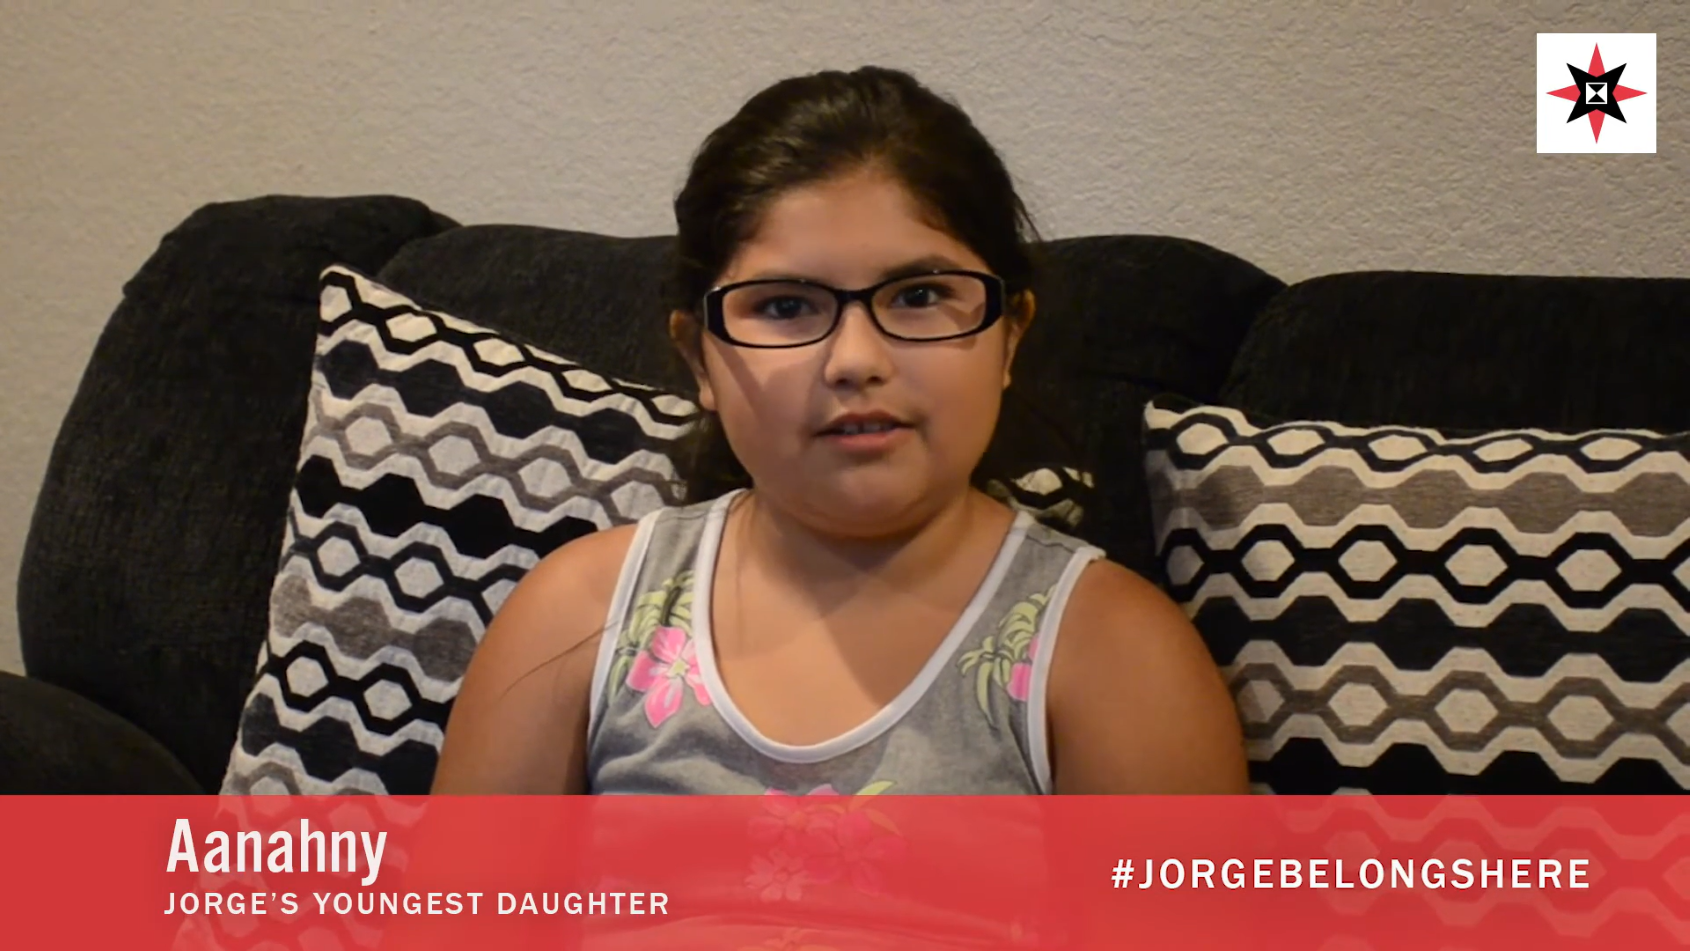 Jorge's children on why they need their father with them in the U.S.